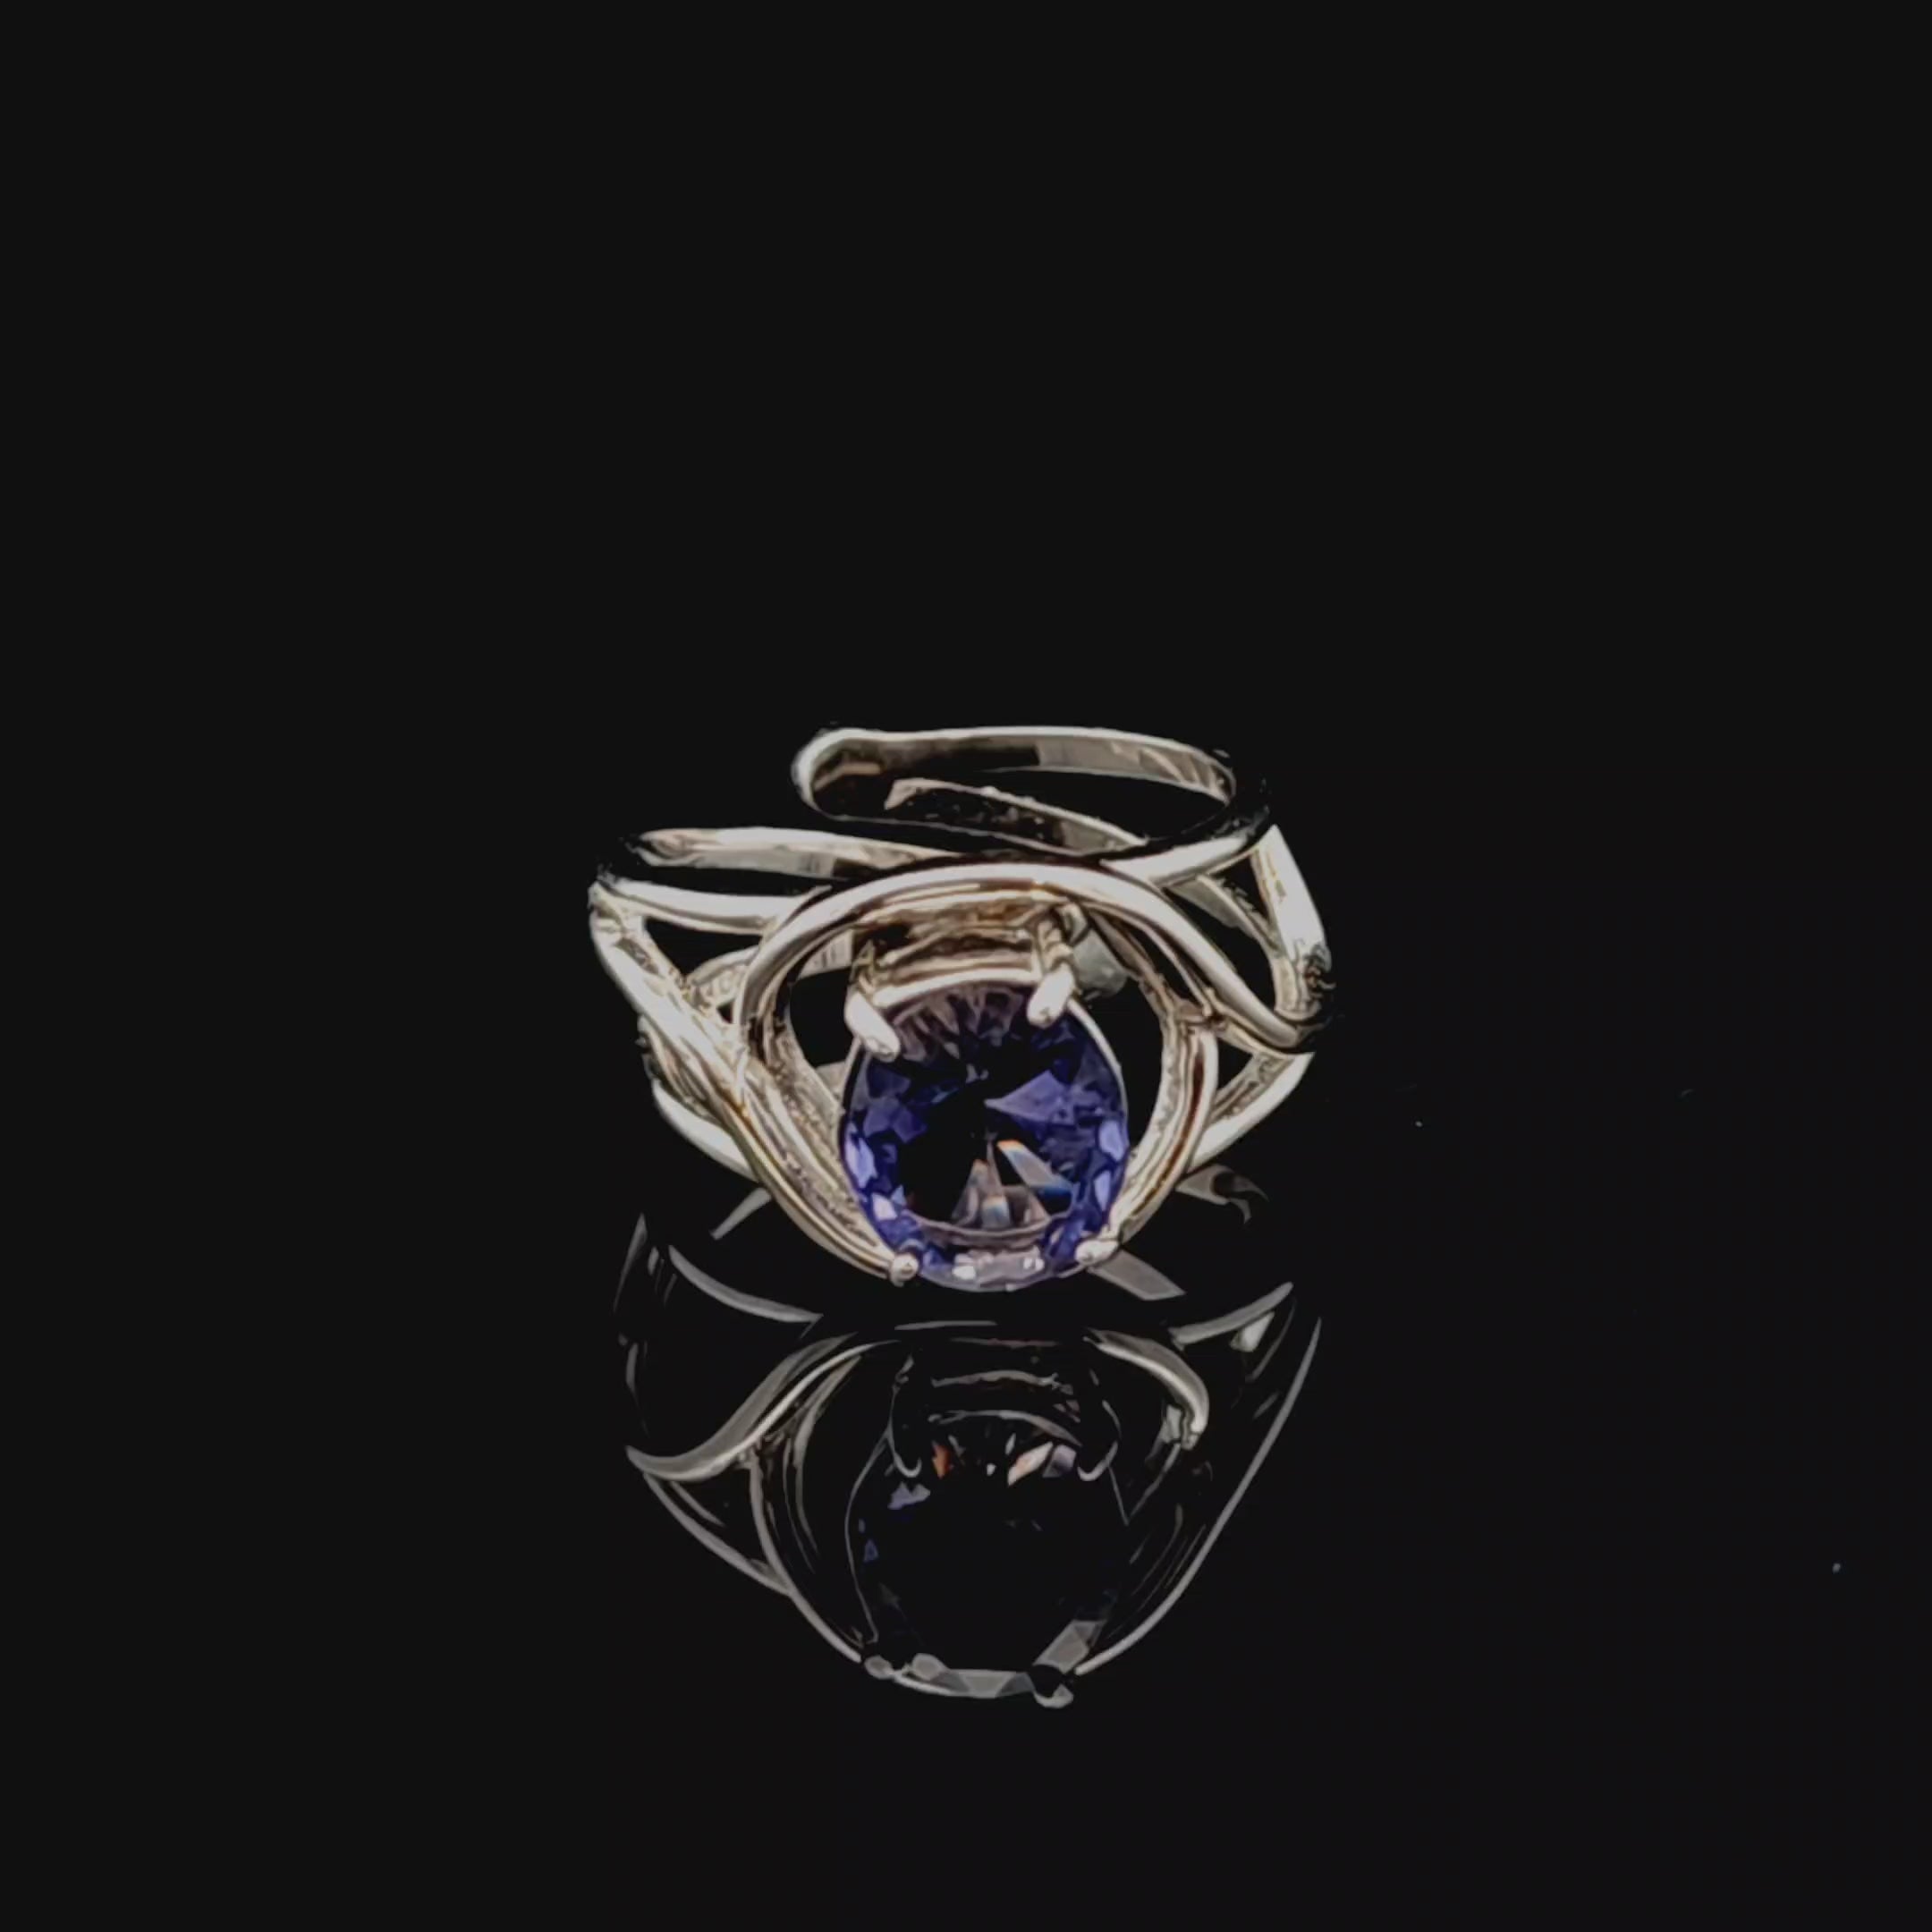 Iolite Adjustable Finger Cuff Ring .925 Silver (Gem Grade) for Intuition, Divination and Wisdom